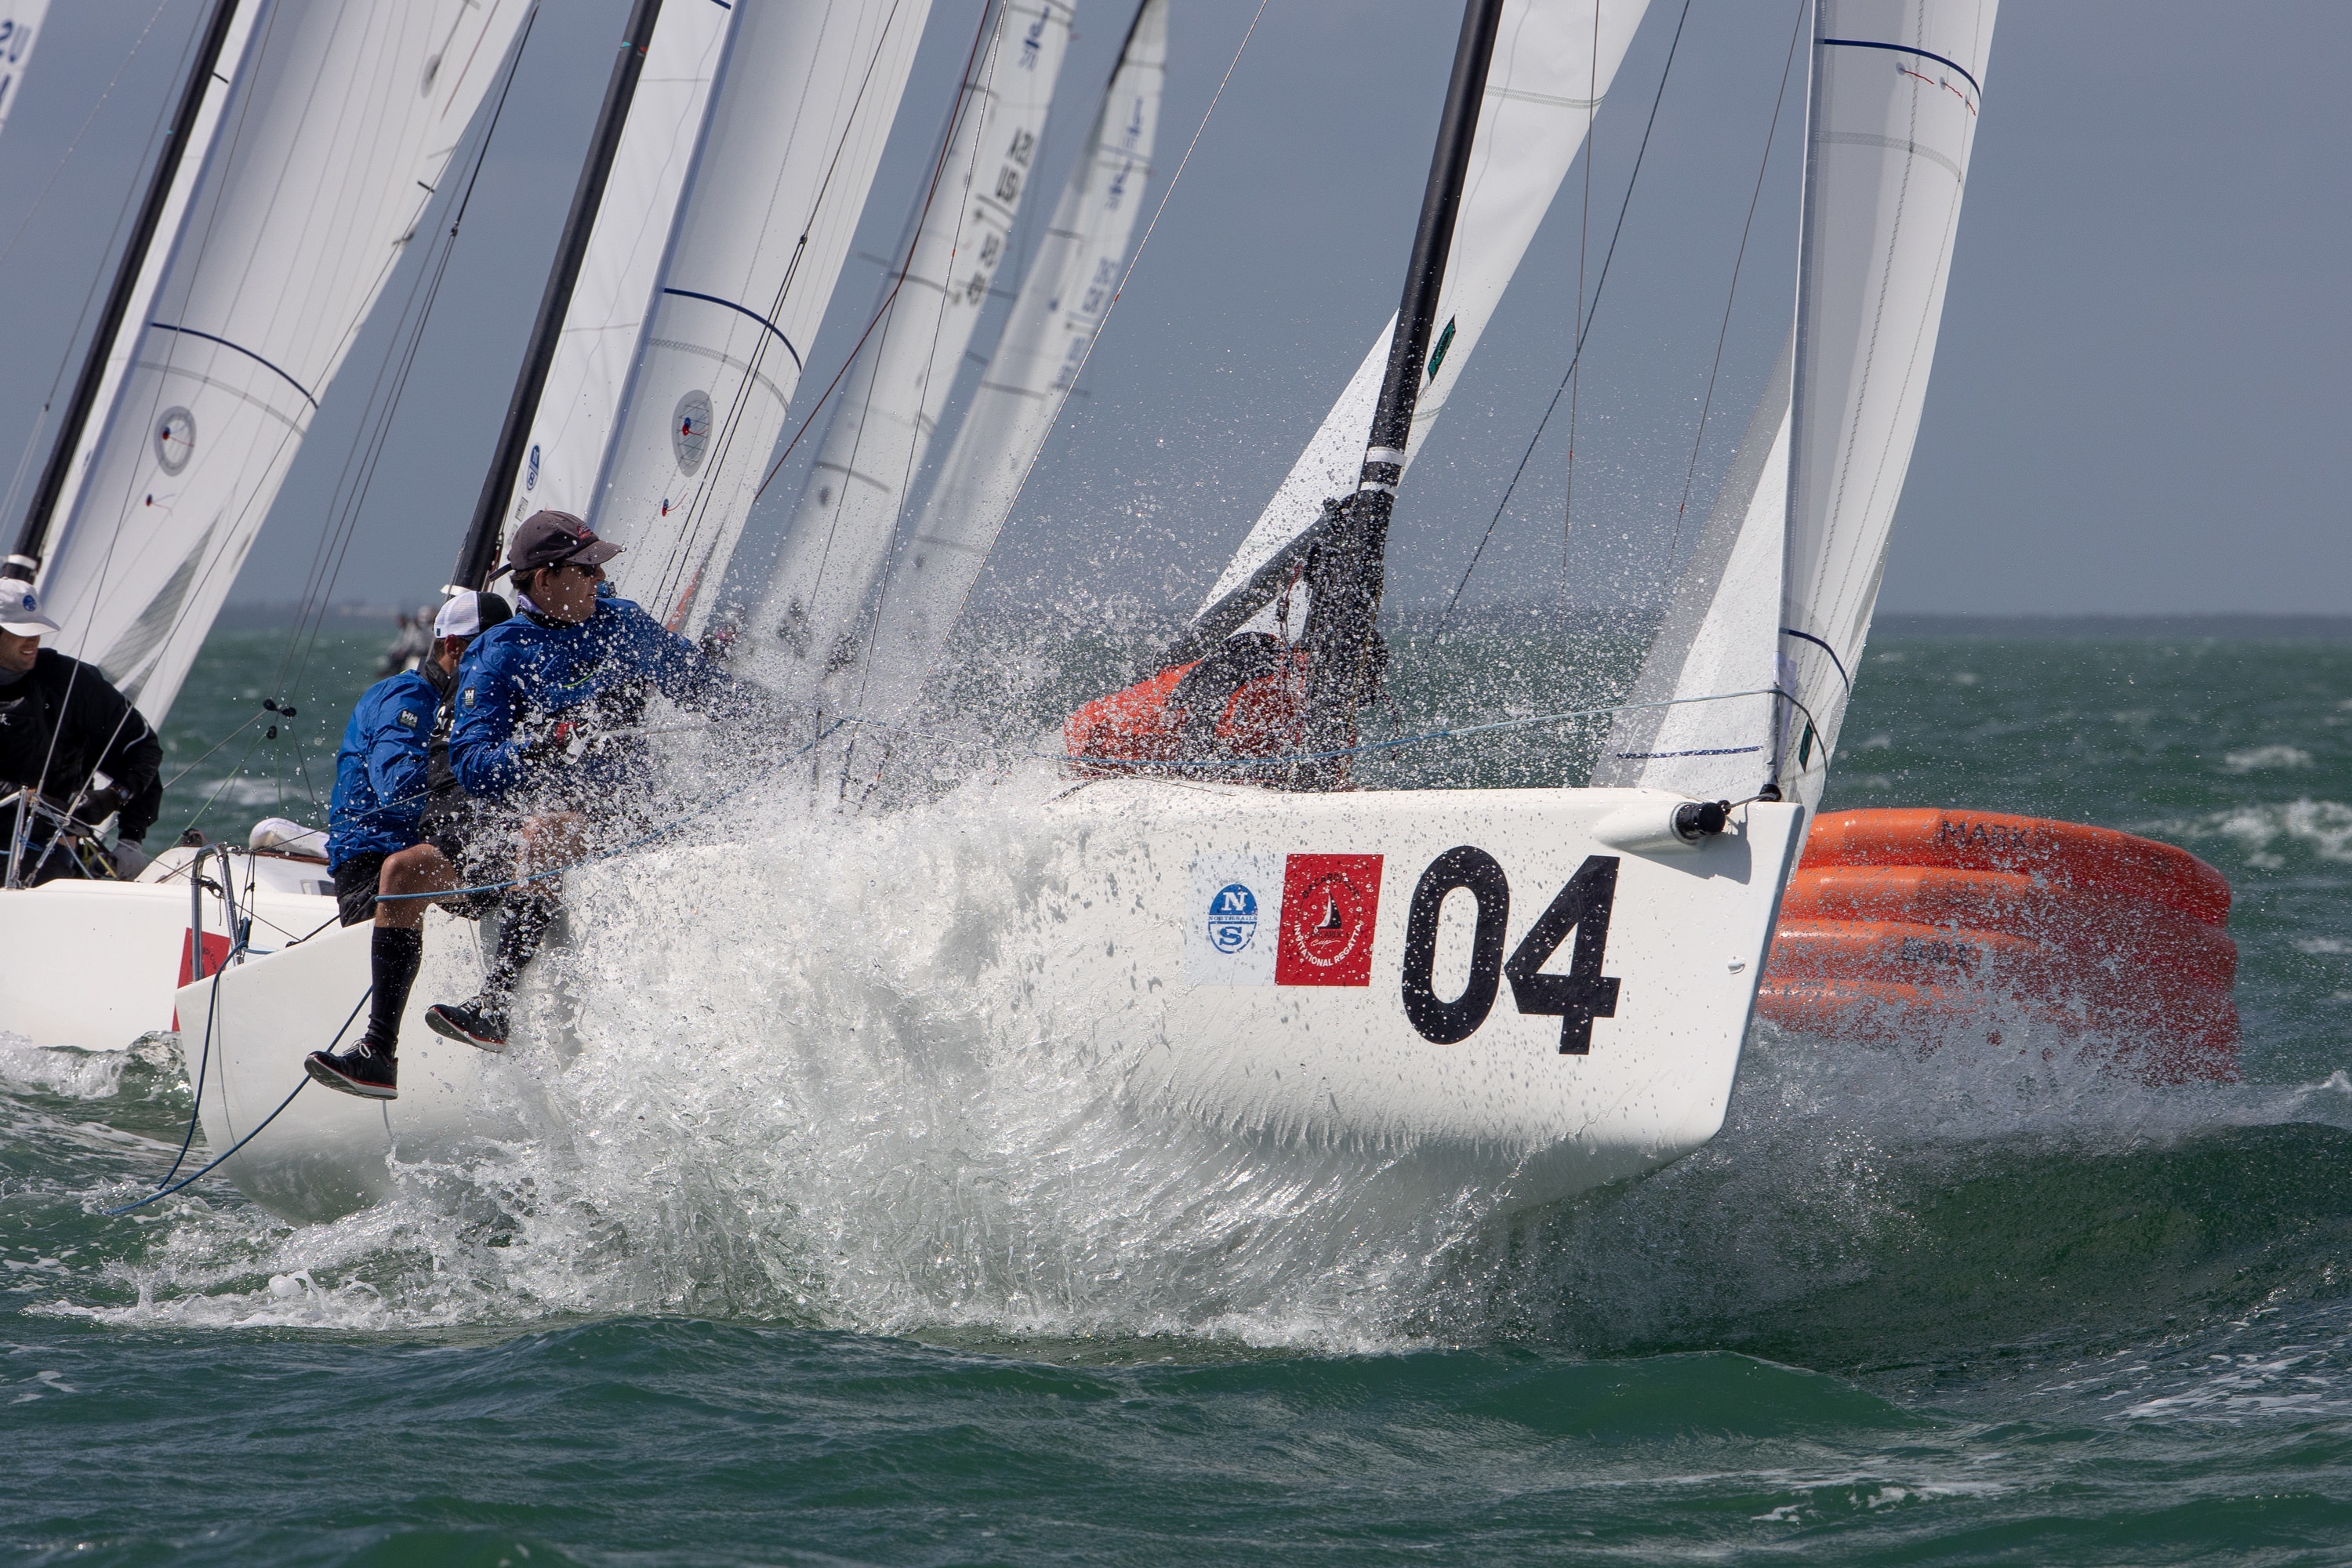  J/70, Melges 24  Bacardi Cup Invitational  Miami FL, USA  Day 1  Odenbach (J/70) and Ayres (Melges 24) first leaders after 3 races